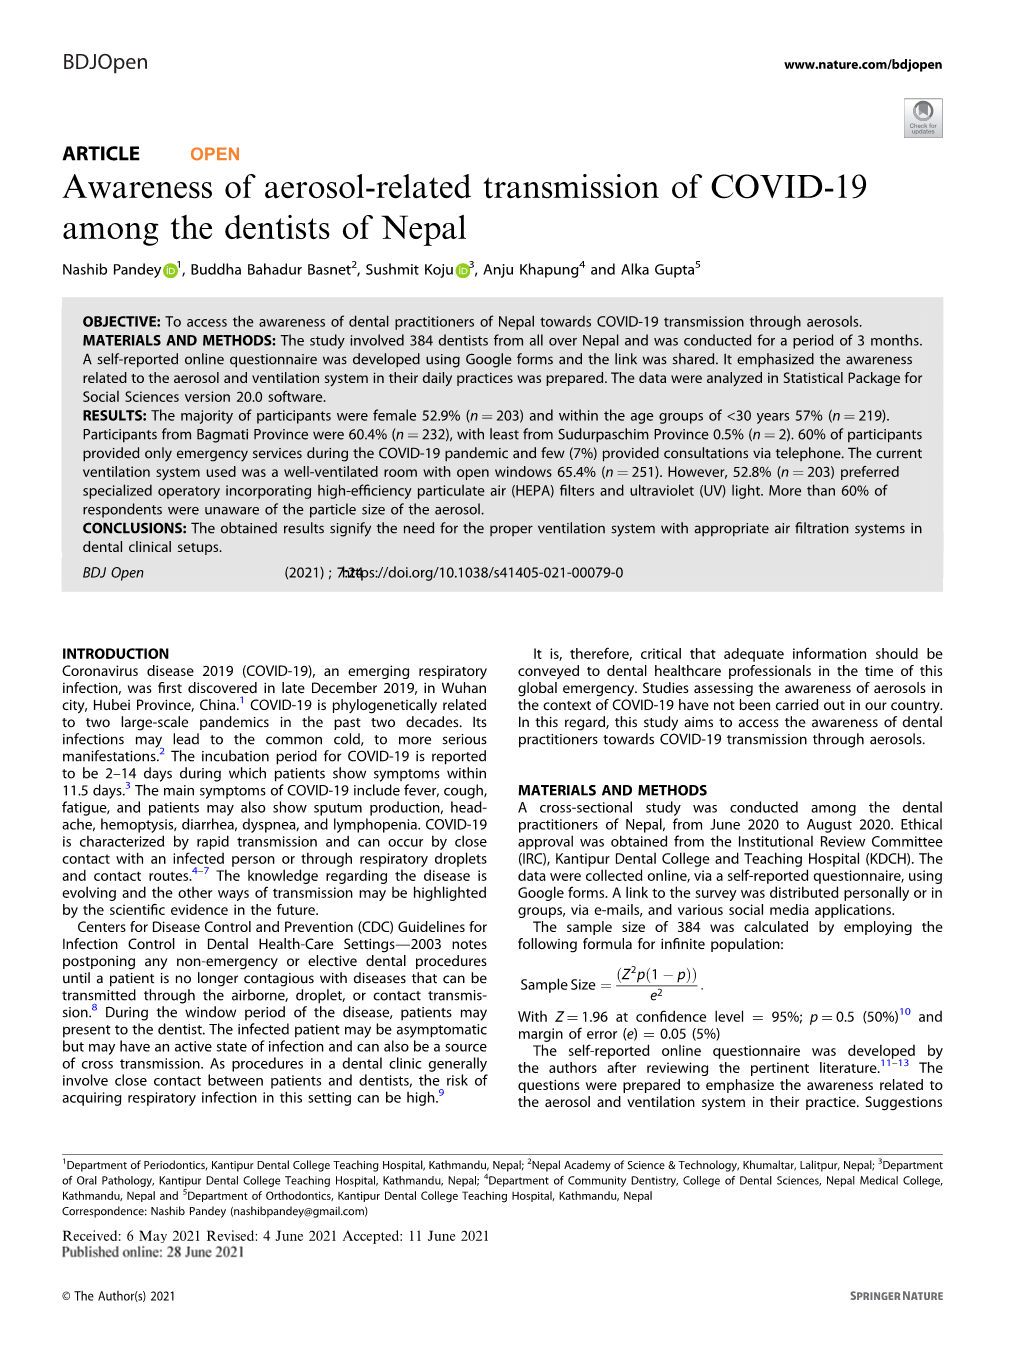 Awareness of Aerosol-Related Transmission of COVID-19 Among the Dentists of Nepal